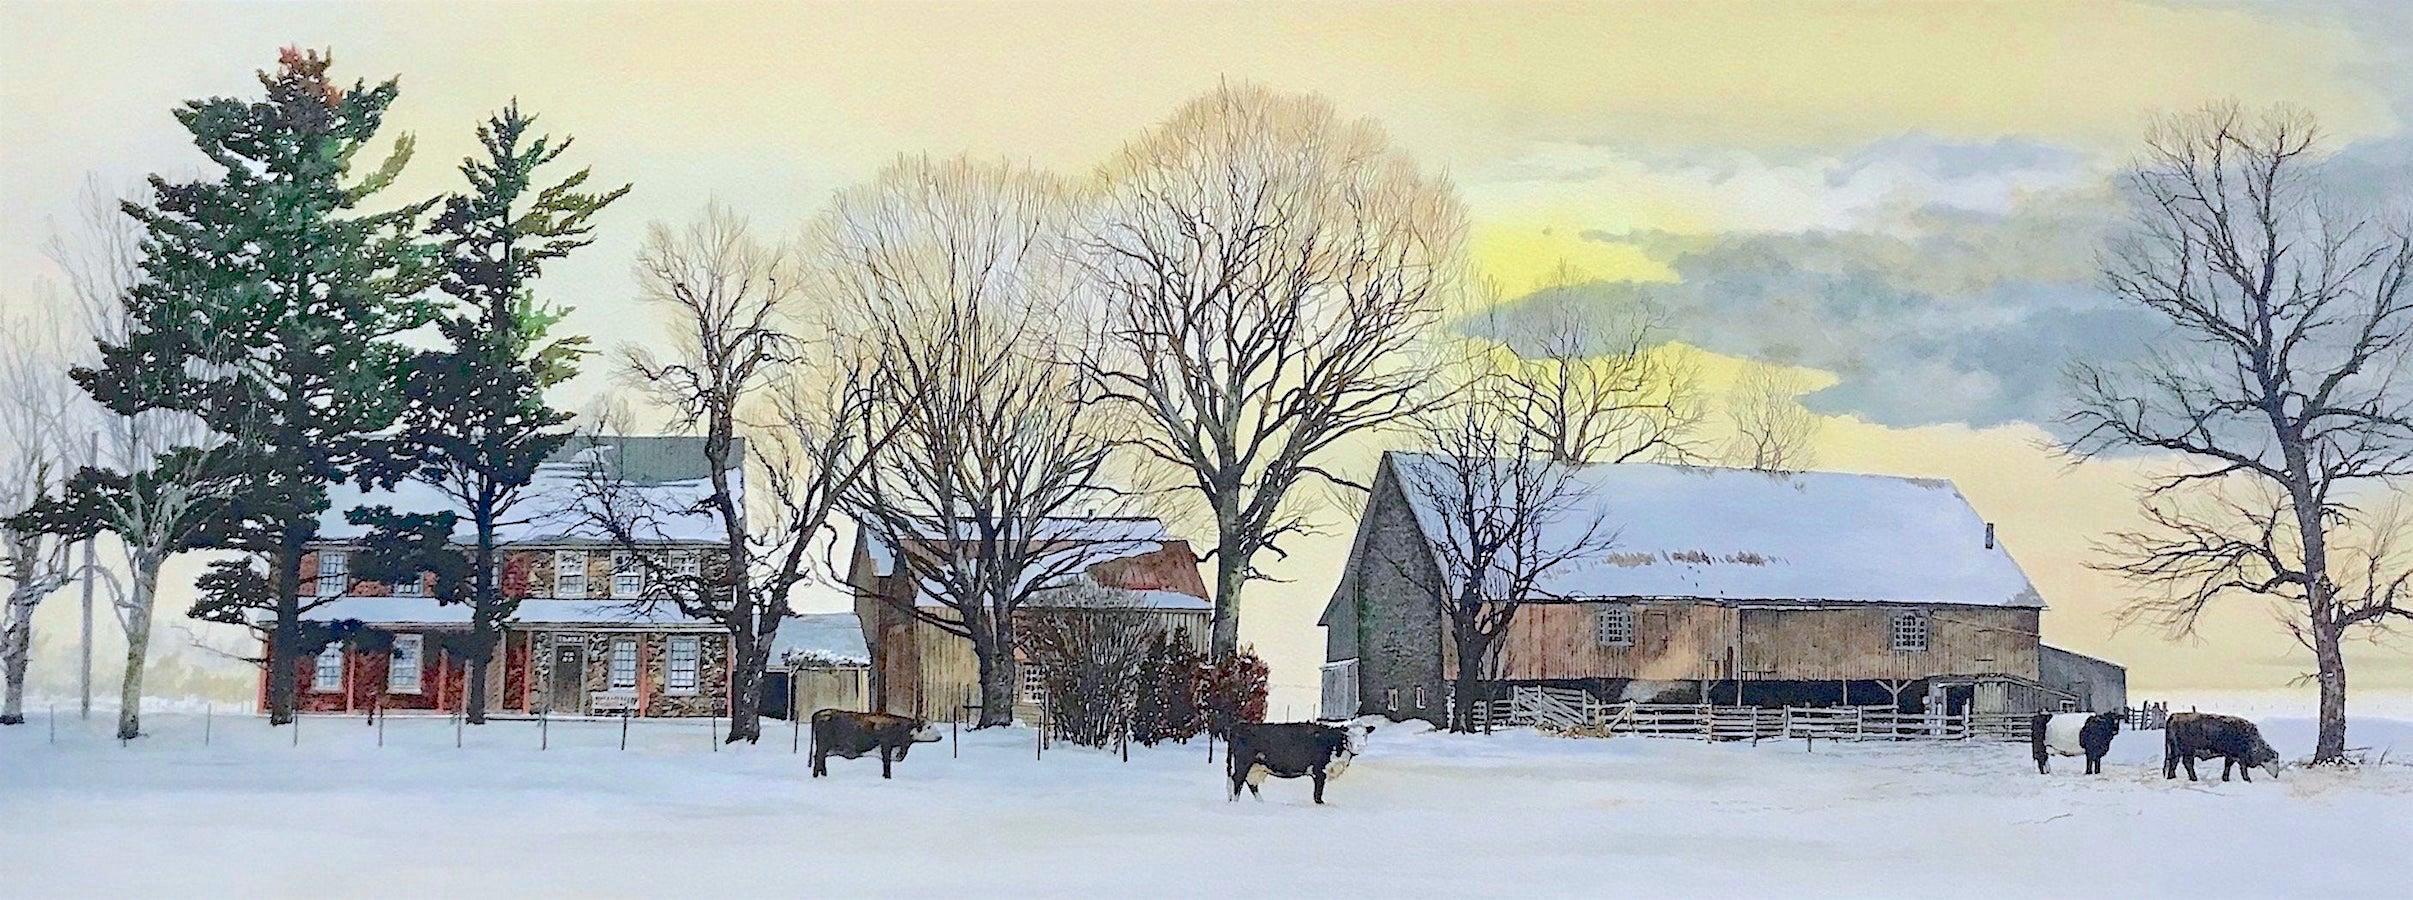 Peter Sculthorpe Landscape Print - BACKLAND Signed Lithograph, Bucks County Landscape, Stone Farmhouse, Yellow Sky